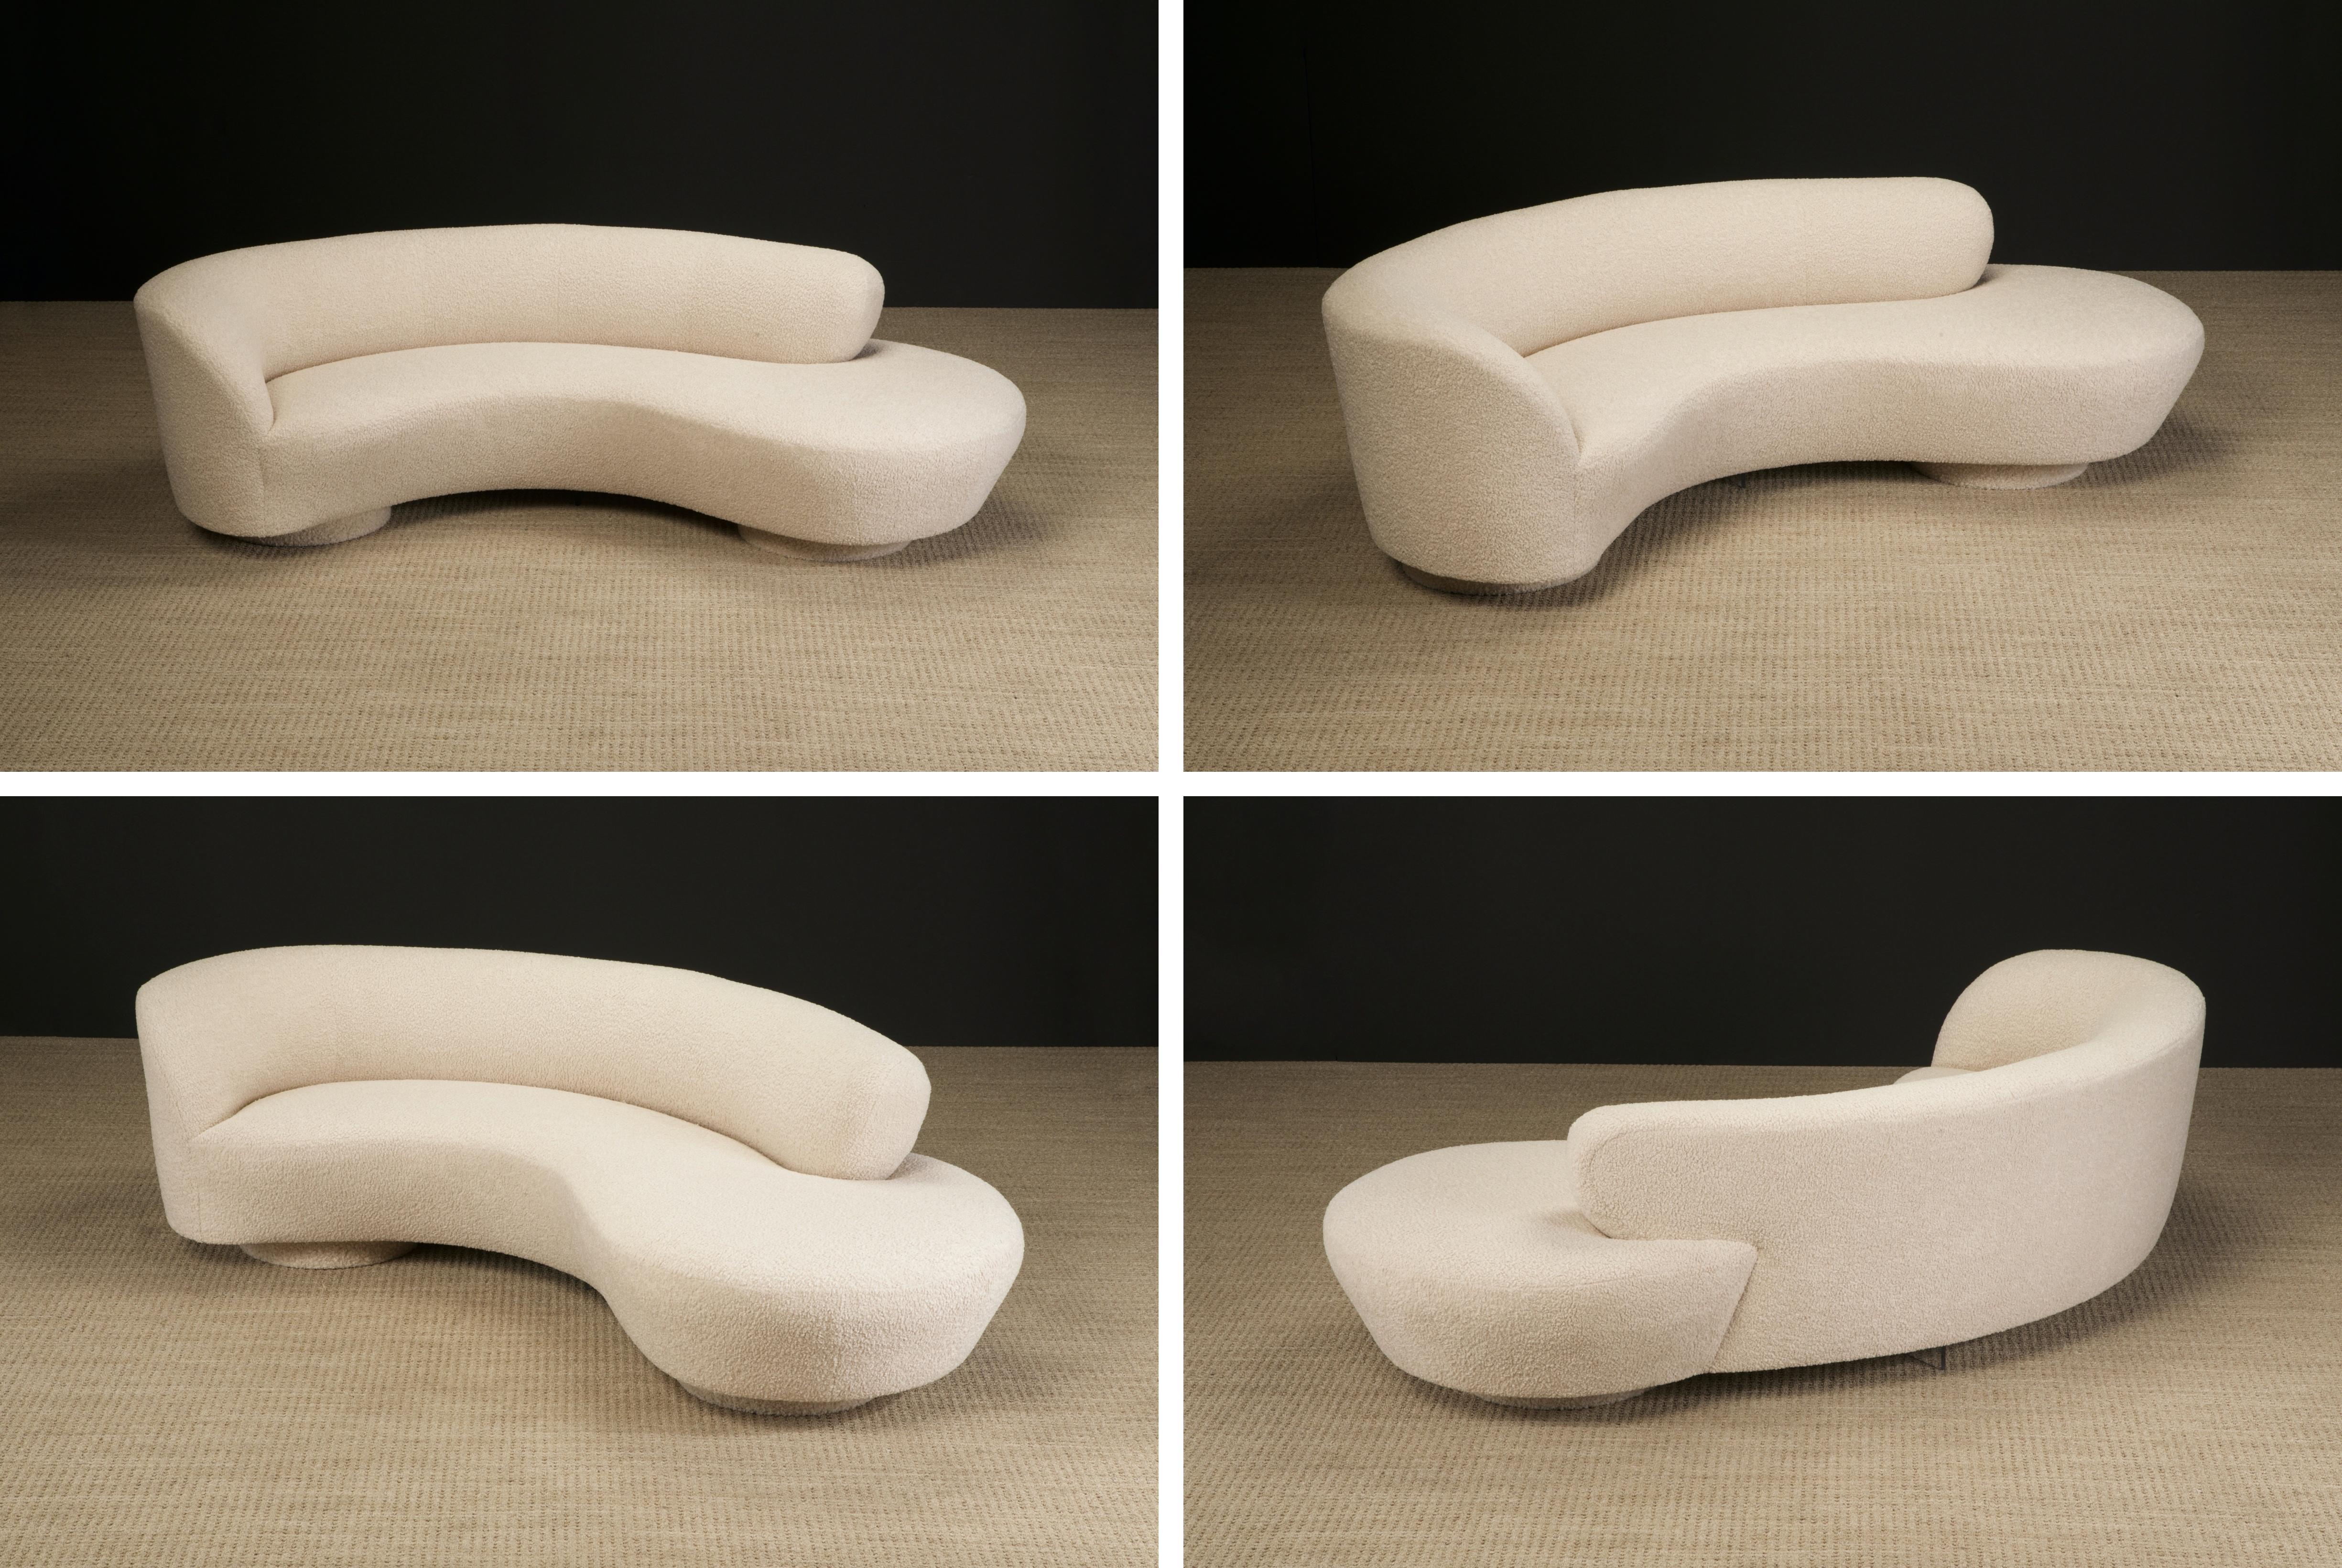 Modern Vladimir Kagan for Directional 'Cloud' Sofas in New Nubby Bouclé, c 1980, Signed